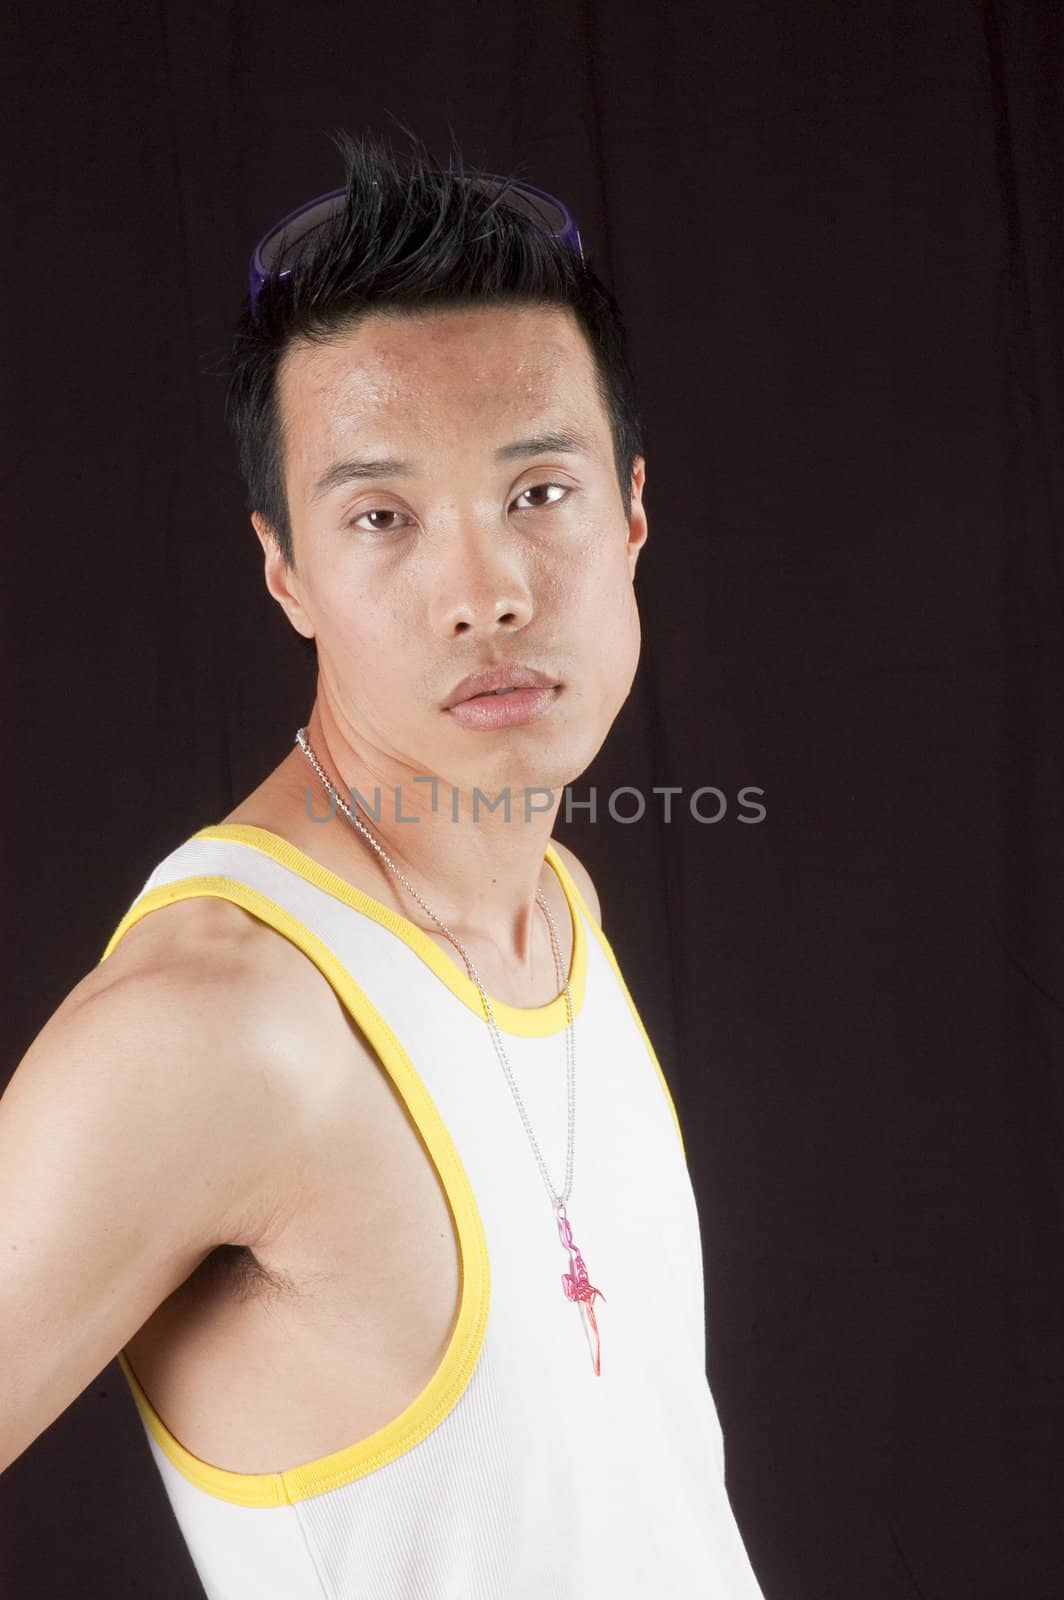 closeup of a young asian man on a black background